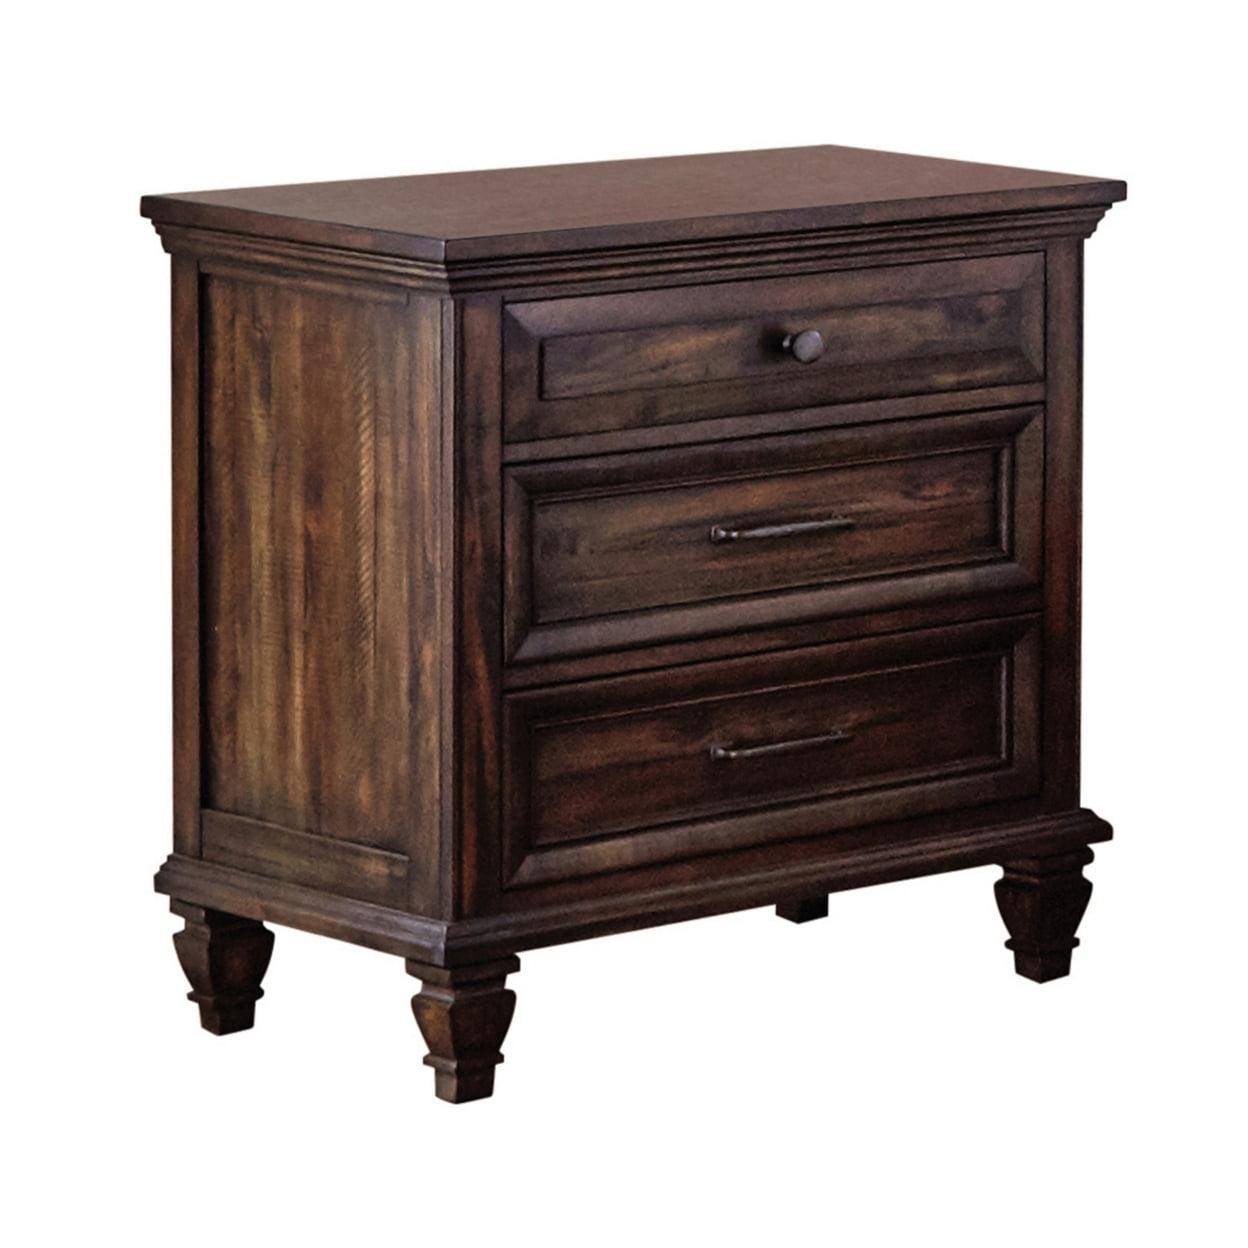 Elegant European 30" Mahogany Nightstand with USB Ports and 3 Drawers